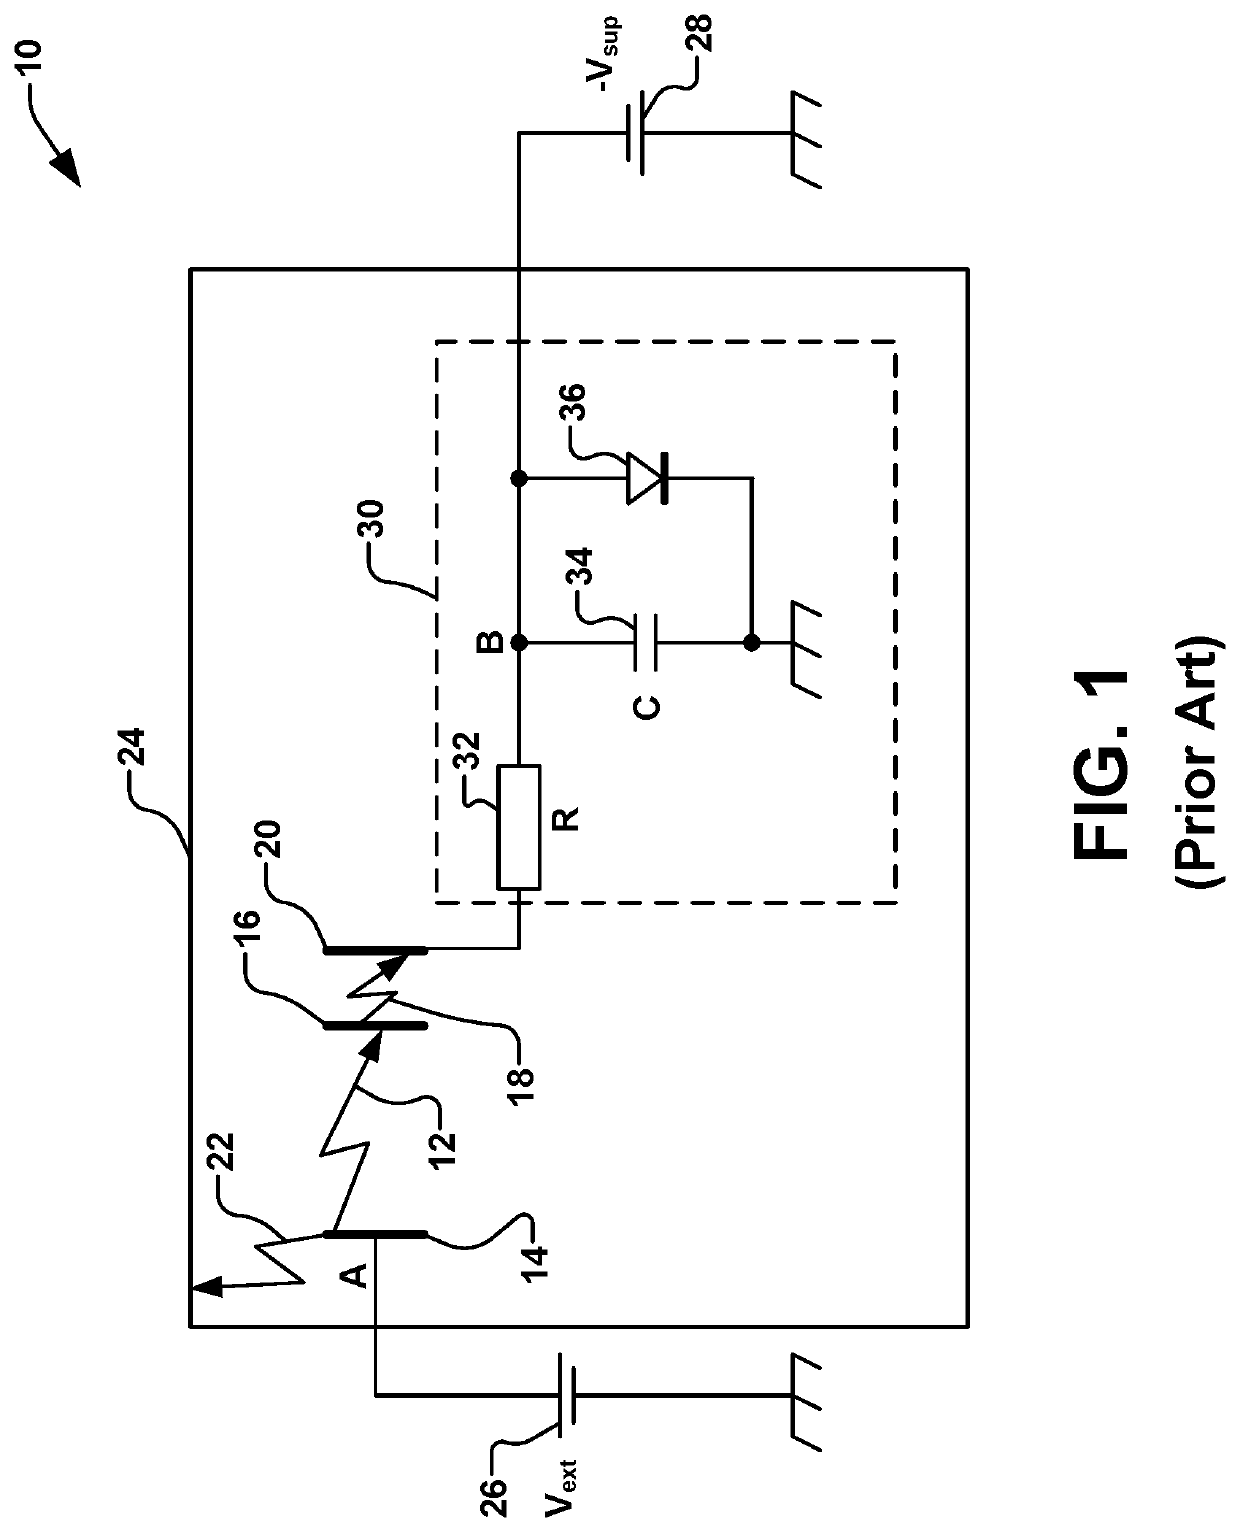 System and method of arc detection using dynamic threshold